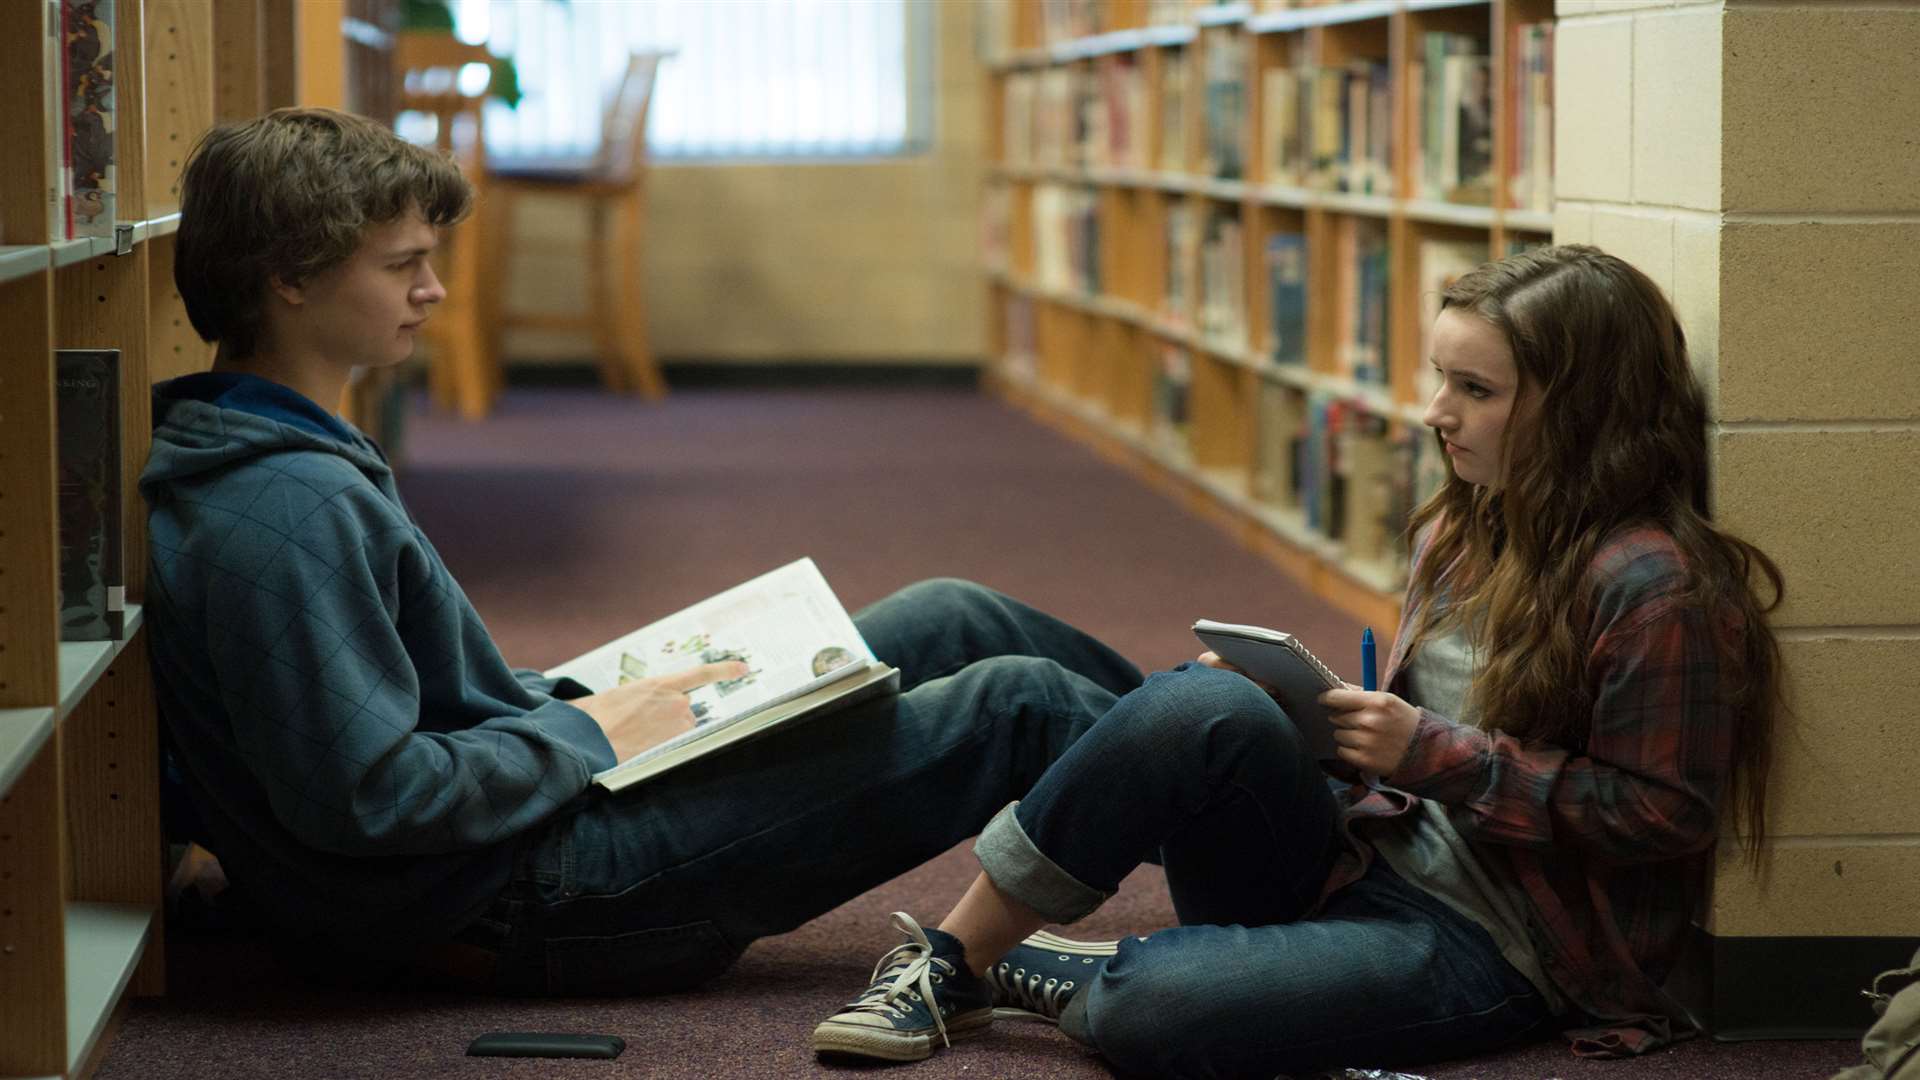 Ansel Elgort as Tim Mooney and Kaitlyn Dever as Brandy Beltmeyer, in Men, Women & Children. Picture: PA Photo/Handout/Paramount Pictures/Dale Robinette